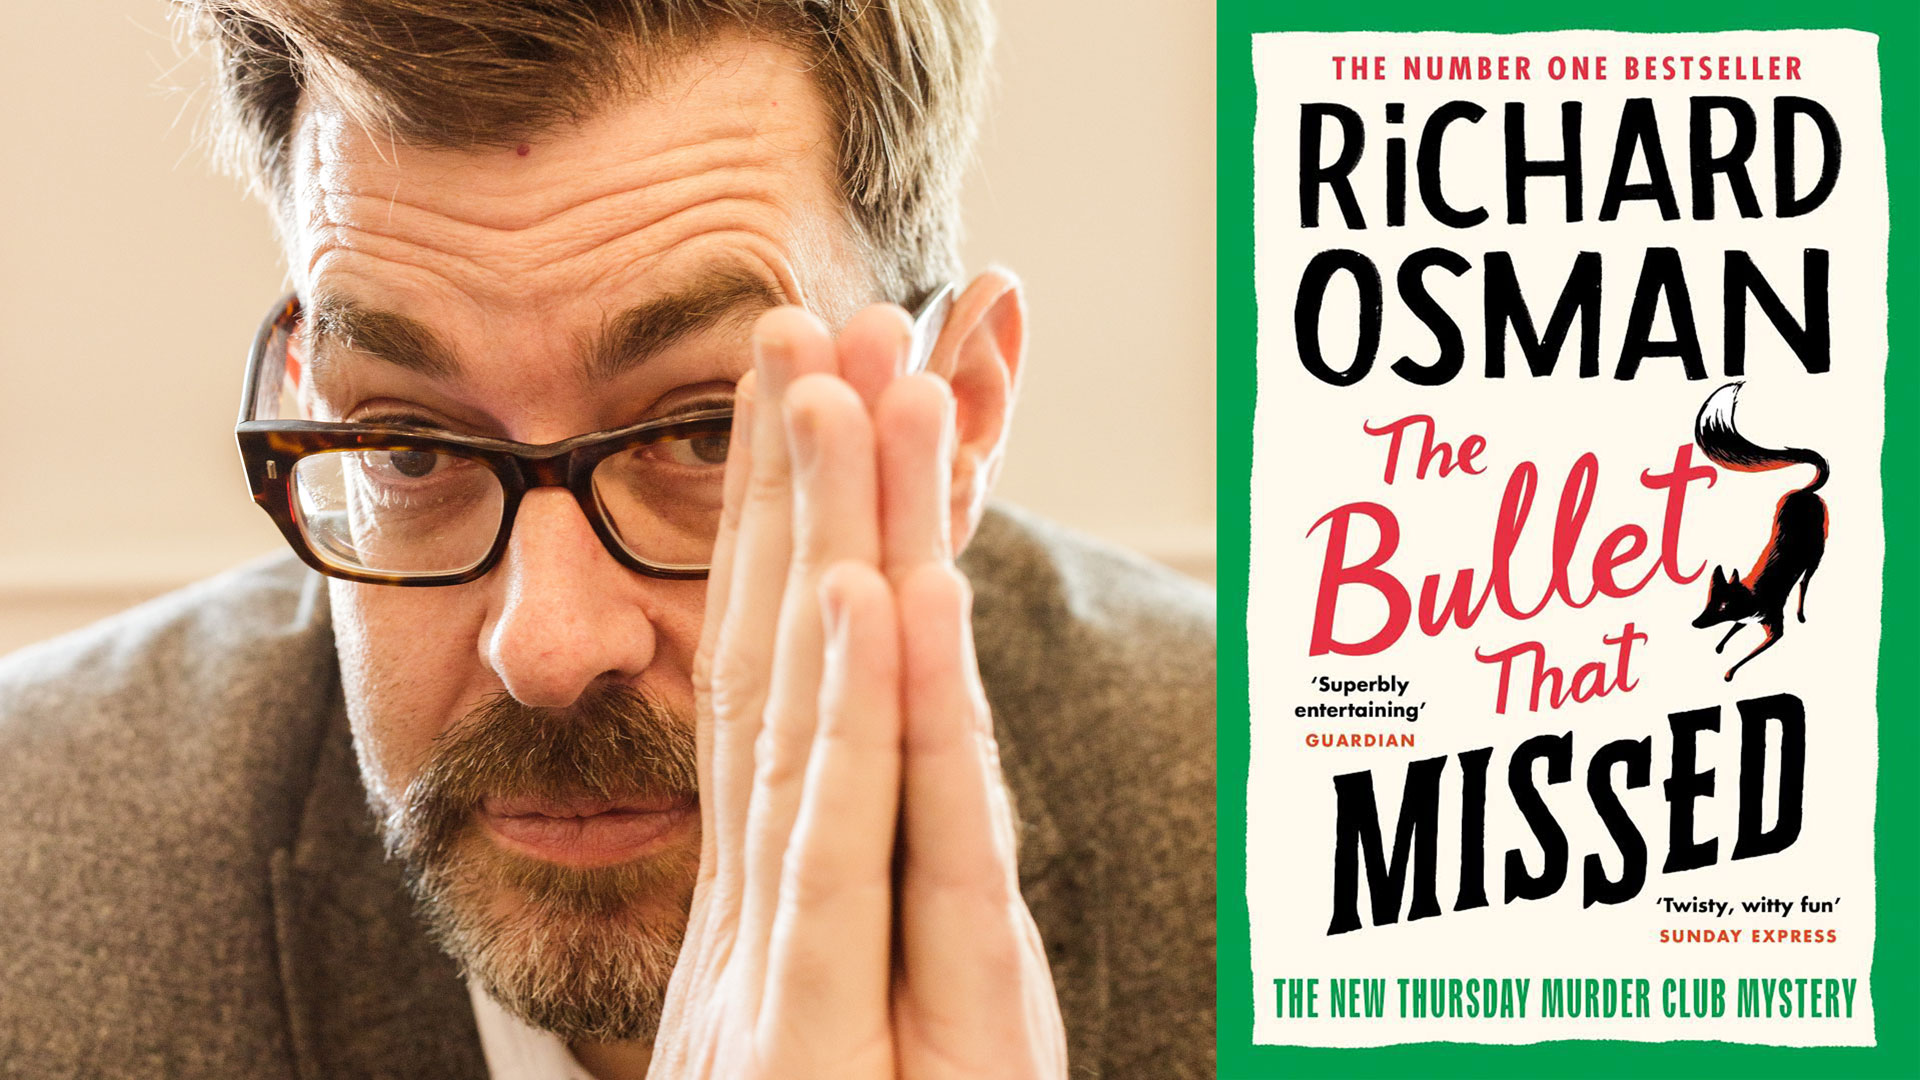 Richard Osman, author of The Bullet That Missed